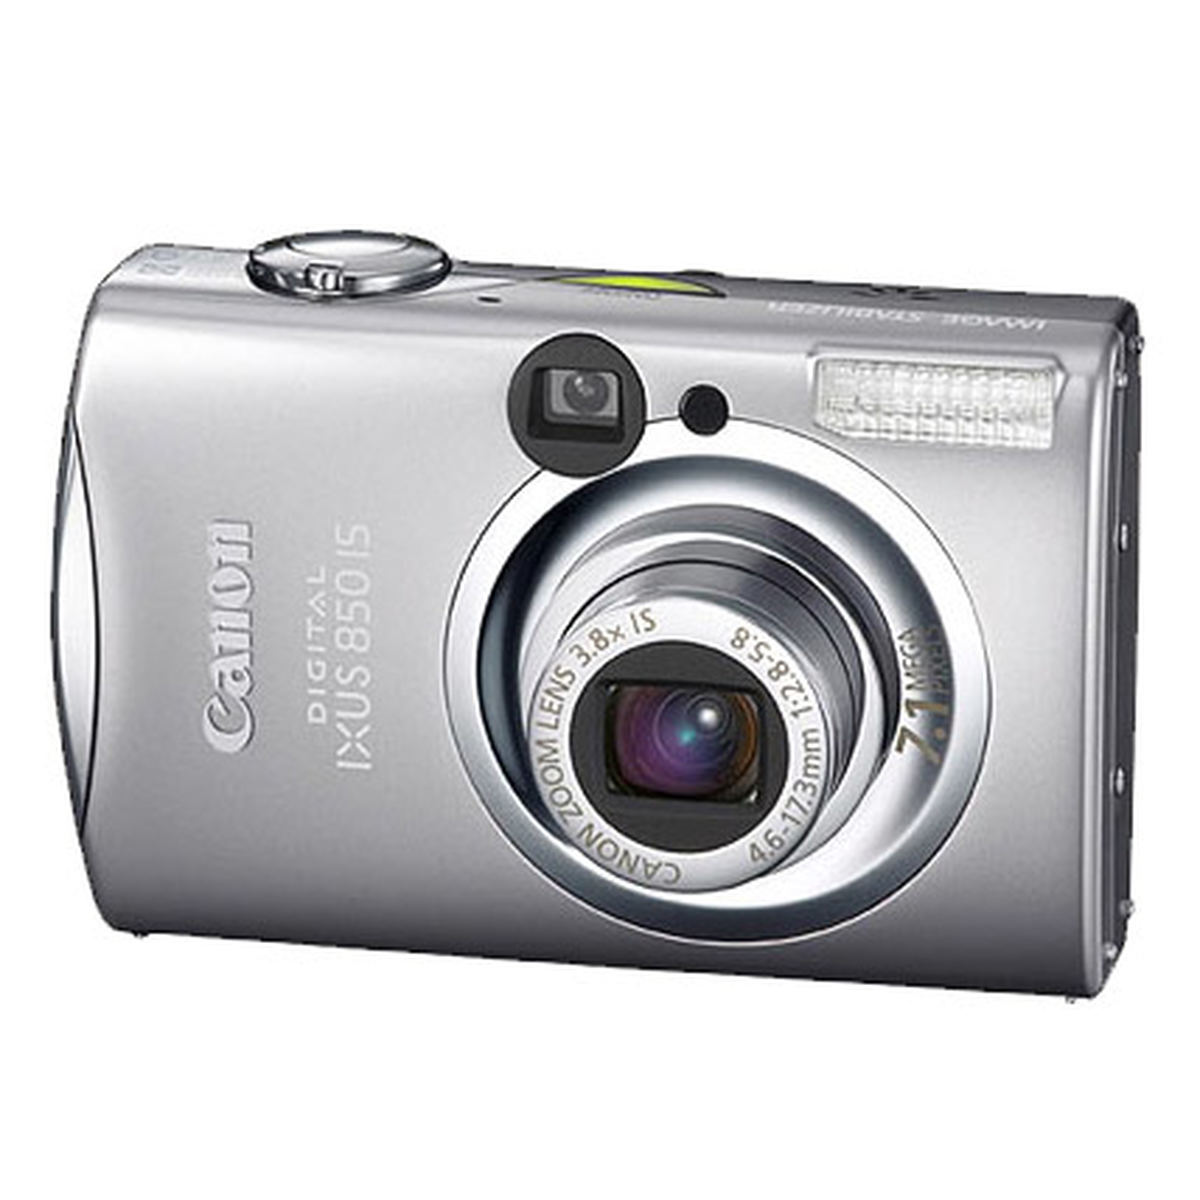 Canon Digital Ixus 850 IS / PowerShot SD800 IS : Specifications and  Opinions | JuzaPhoto